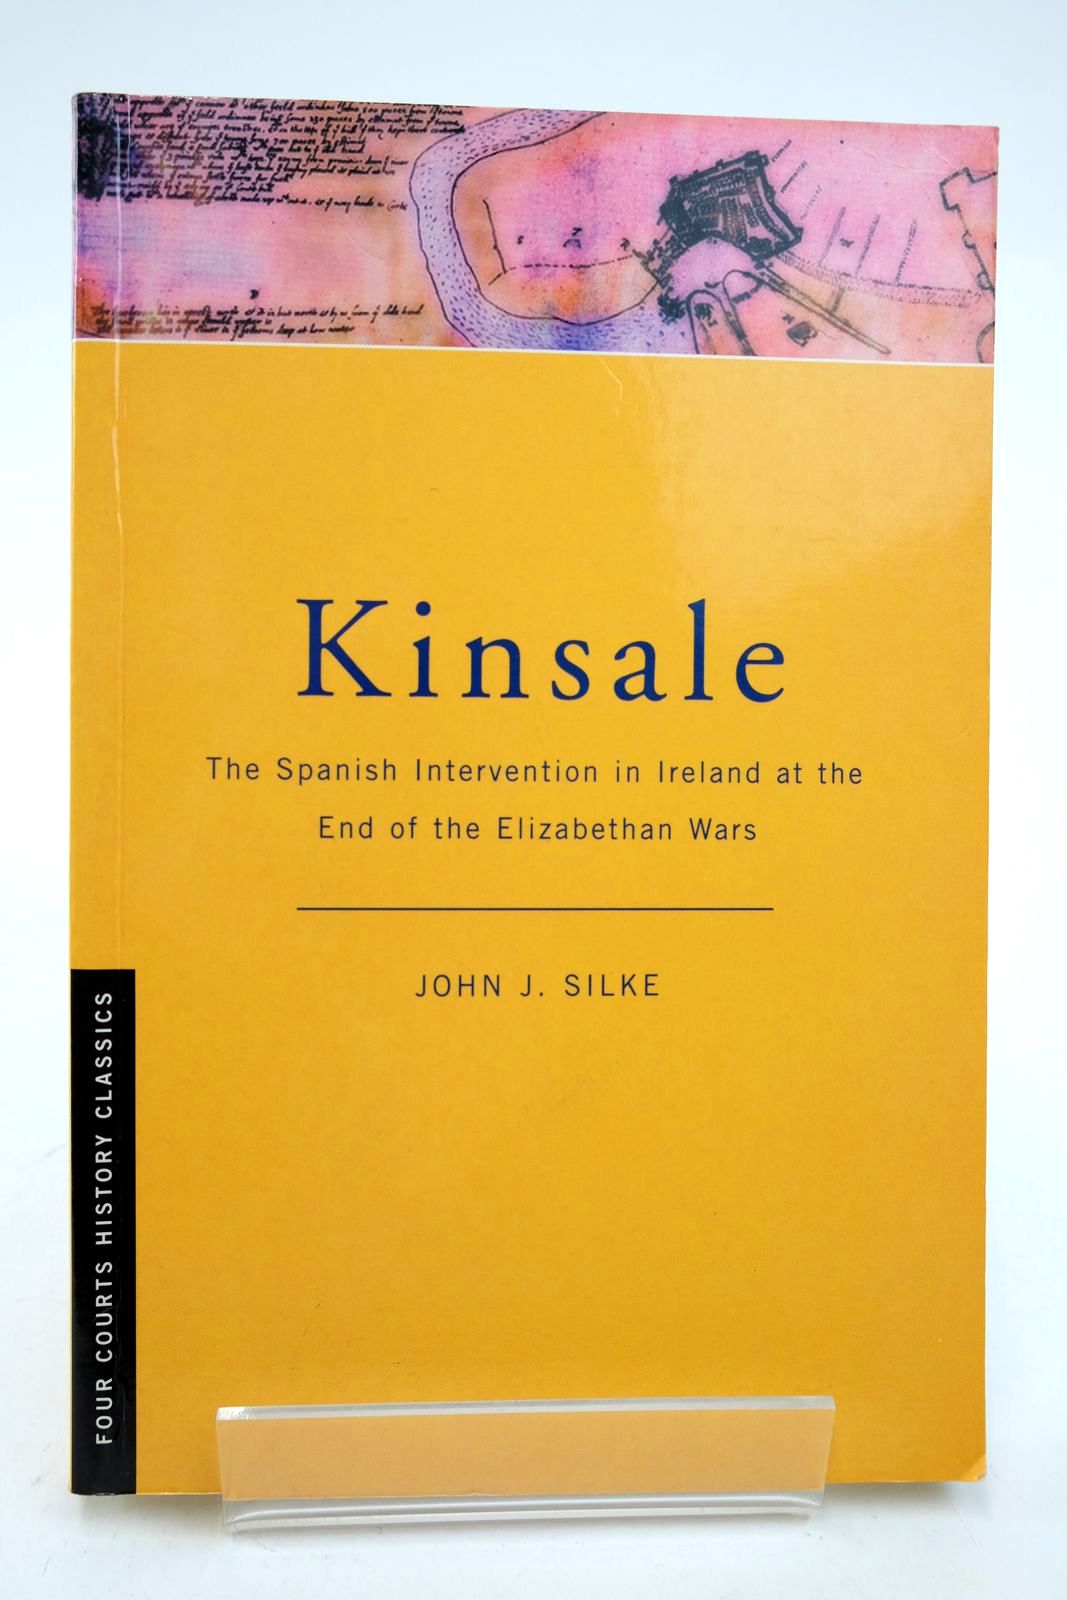 Photo of KINSALE: THE SPANISH INTERVENTION IN IRELAND AT THE END OF THE ELIZABETHAN WARS written by Silke, John J. published by Four Courts Press (STOCK CODE: 2140641)  for sale by Stella & Rose's Books